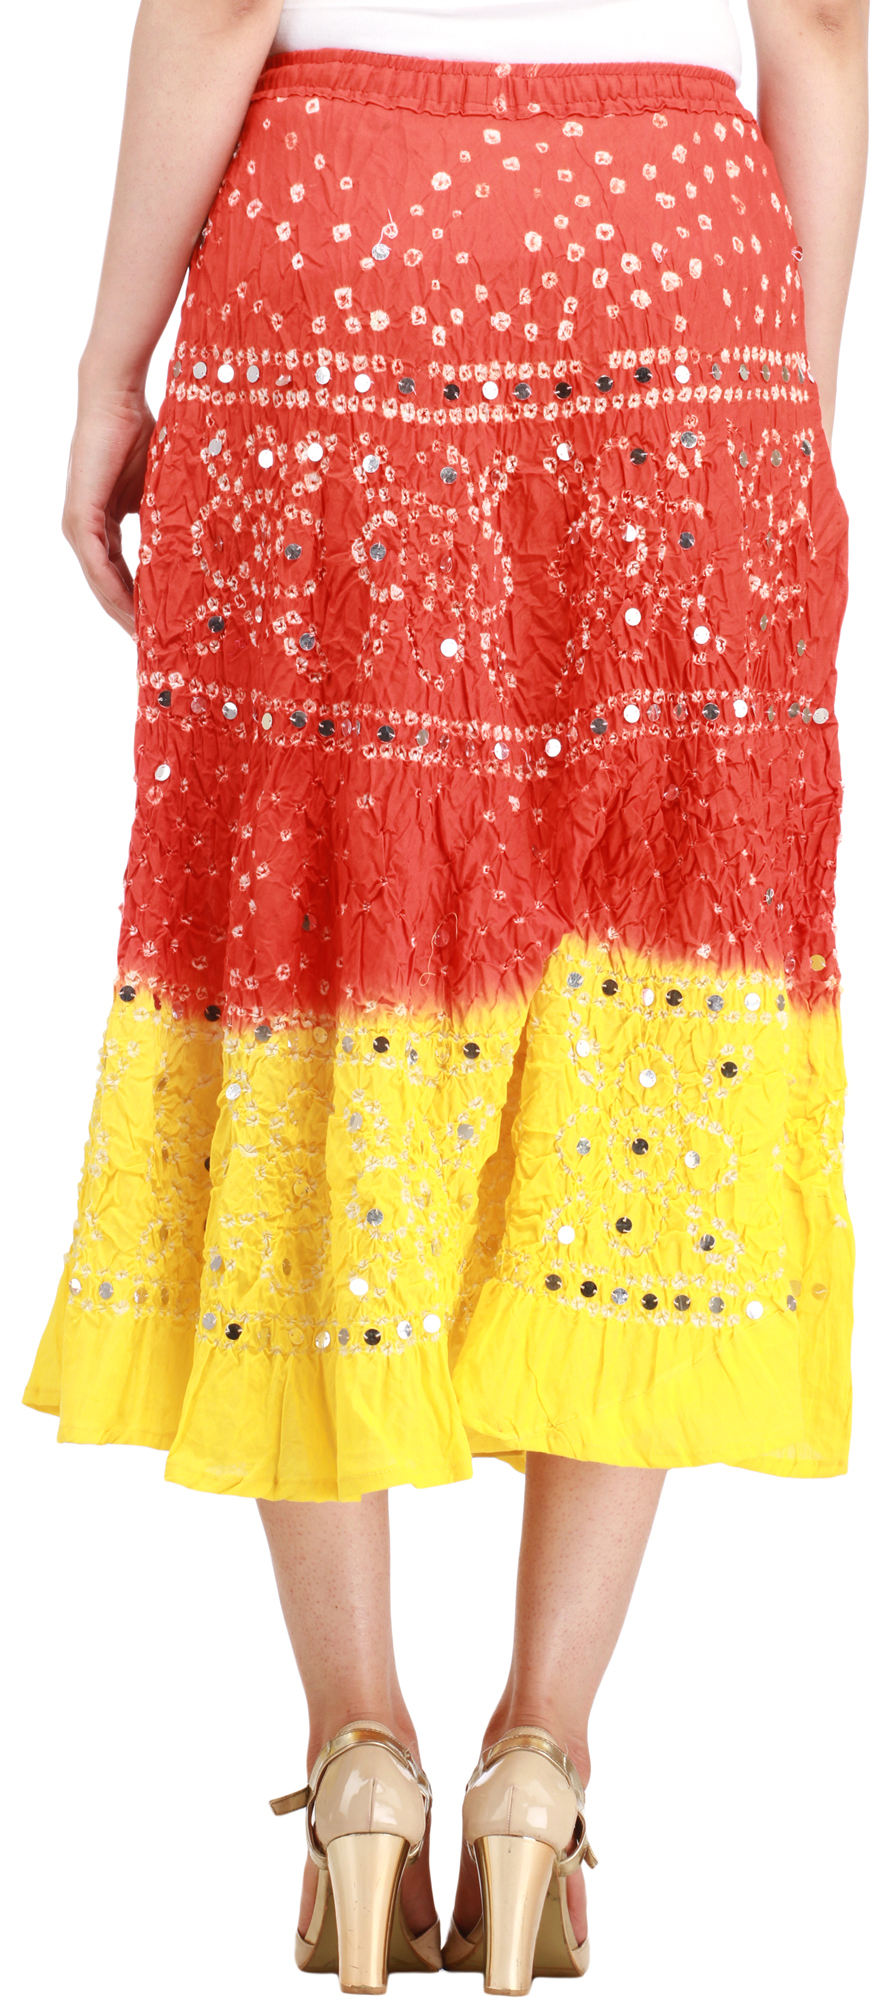 Bandhani Tie-Dye Skirt from Jaipur with Large Sequins